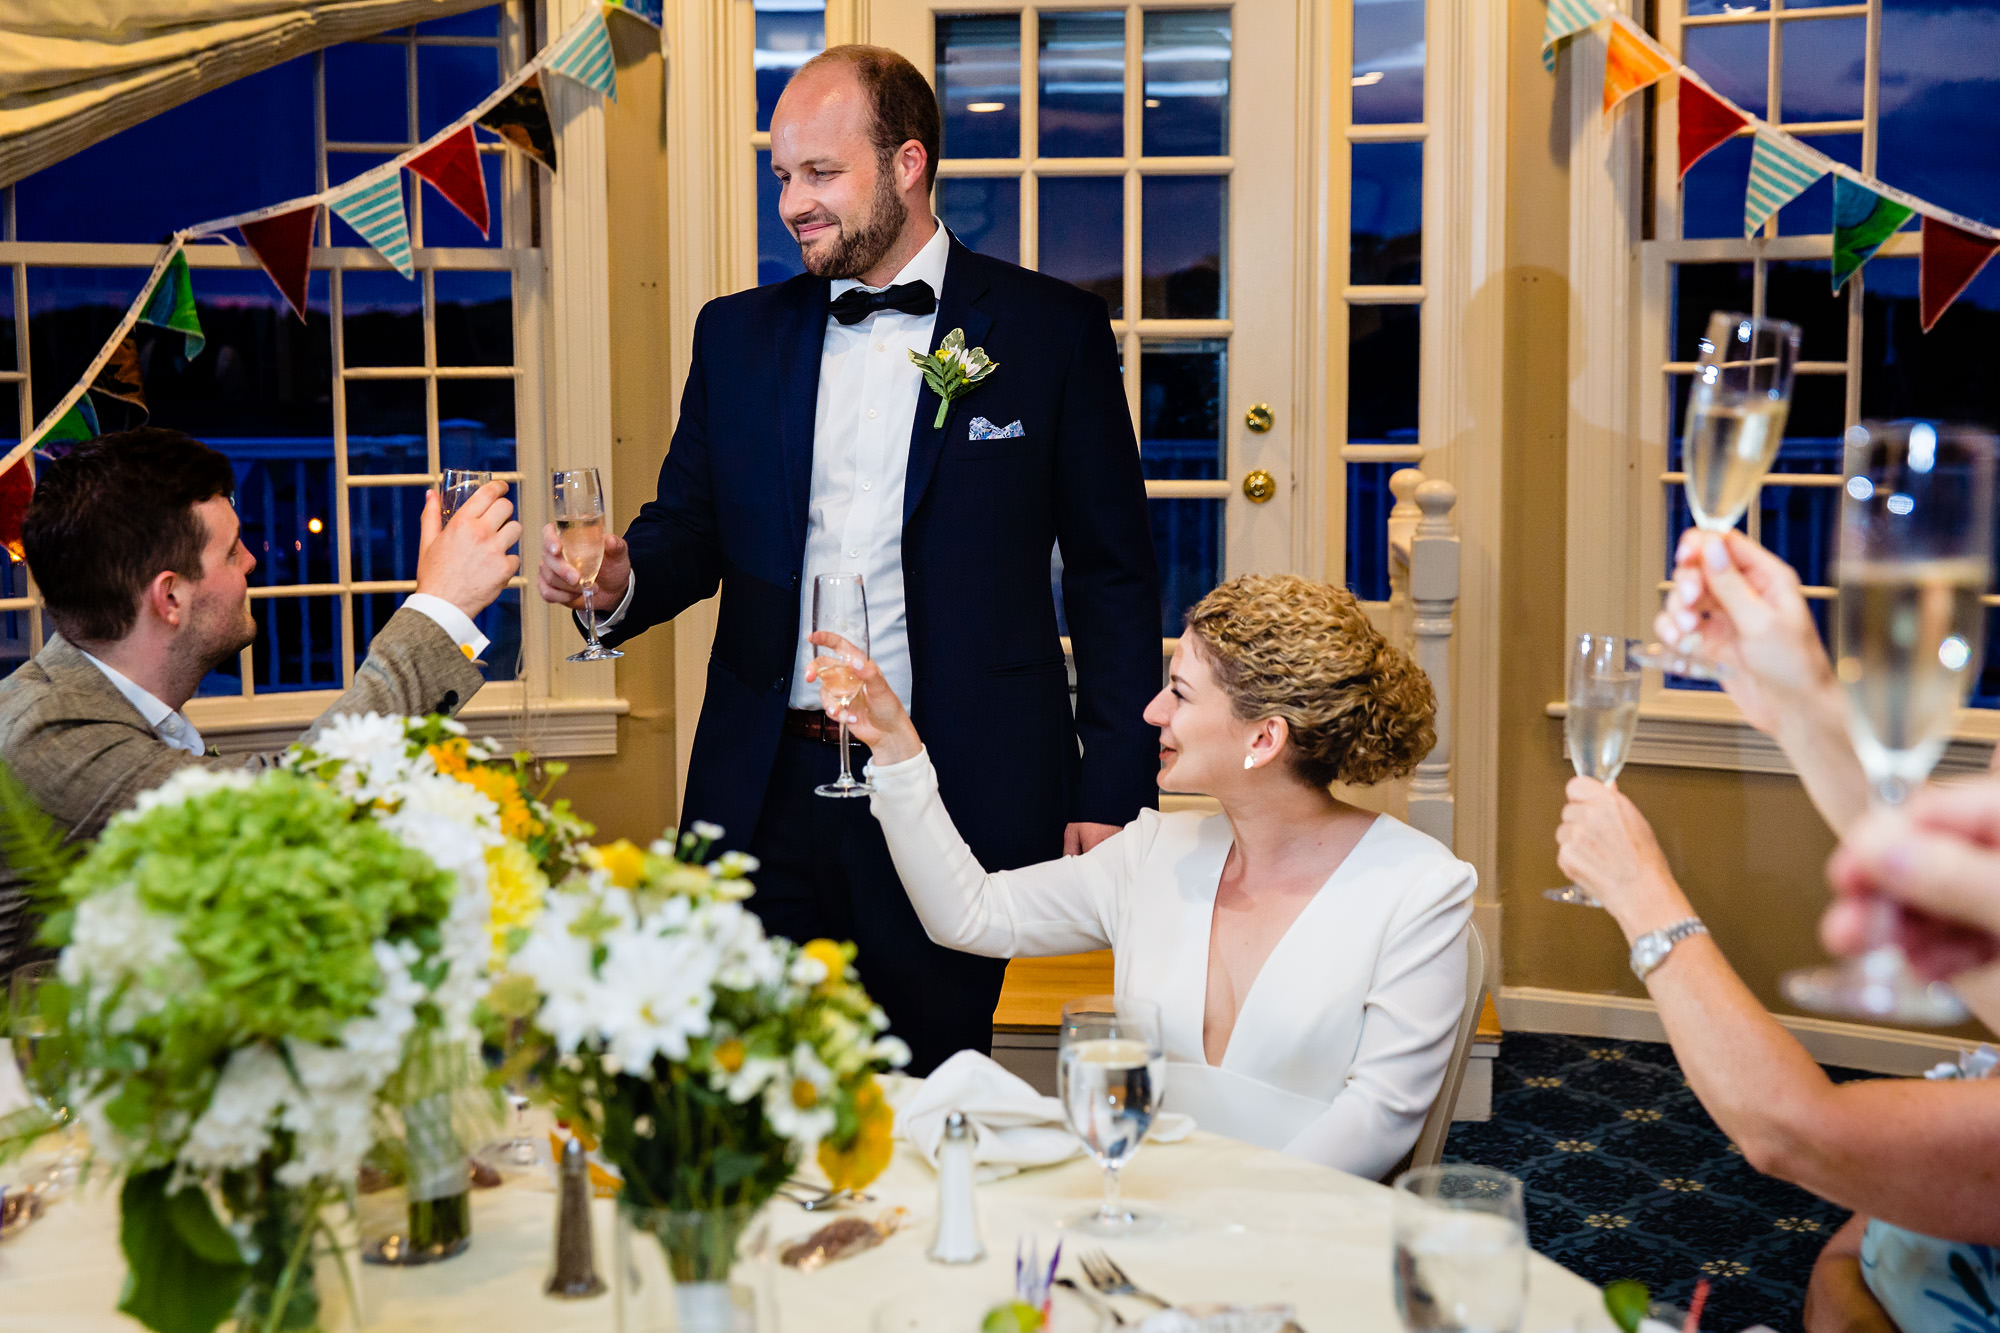 A wedding celebration in the Porcupine Room of the Bar Harbor Inn in Maine